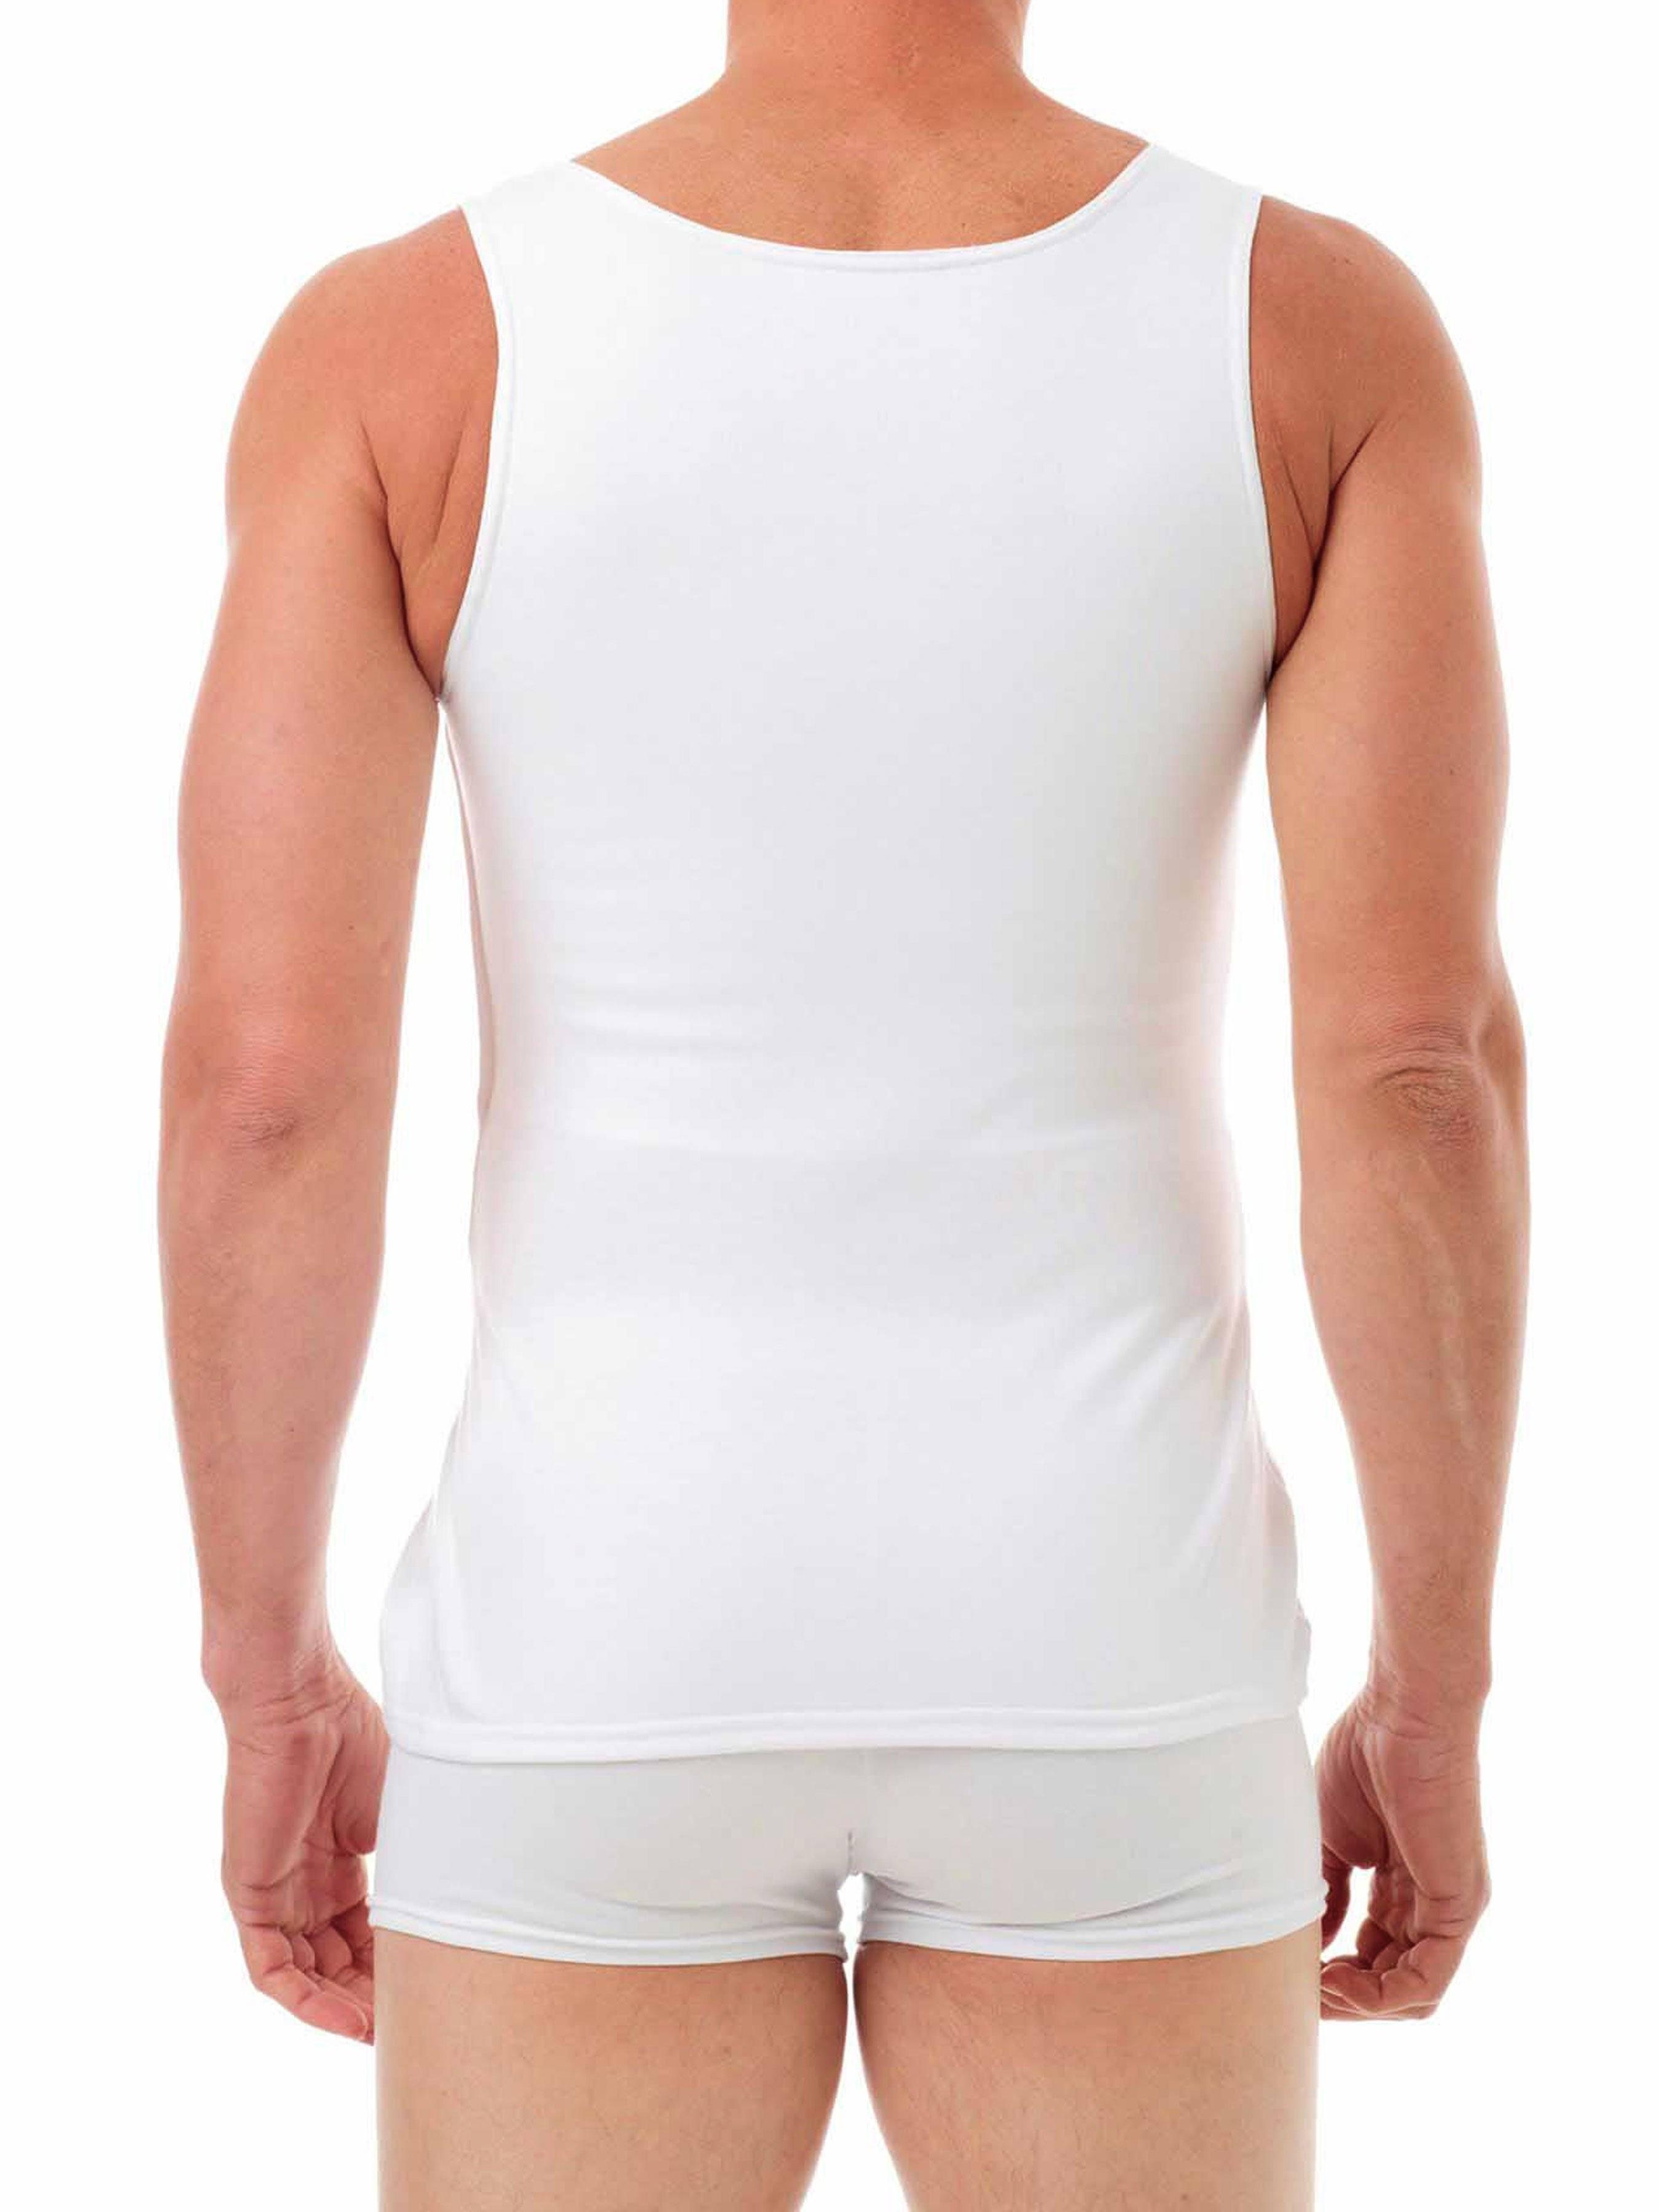 XBODY:UK Compression Vest - Chest Only | SALE